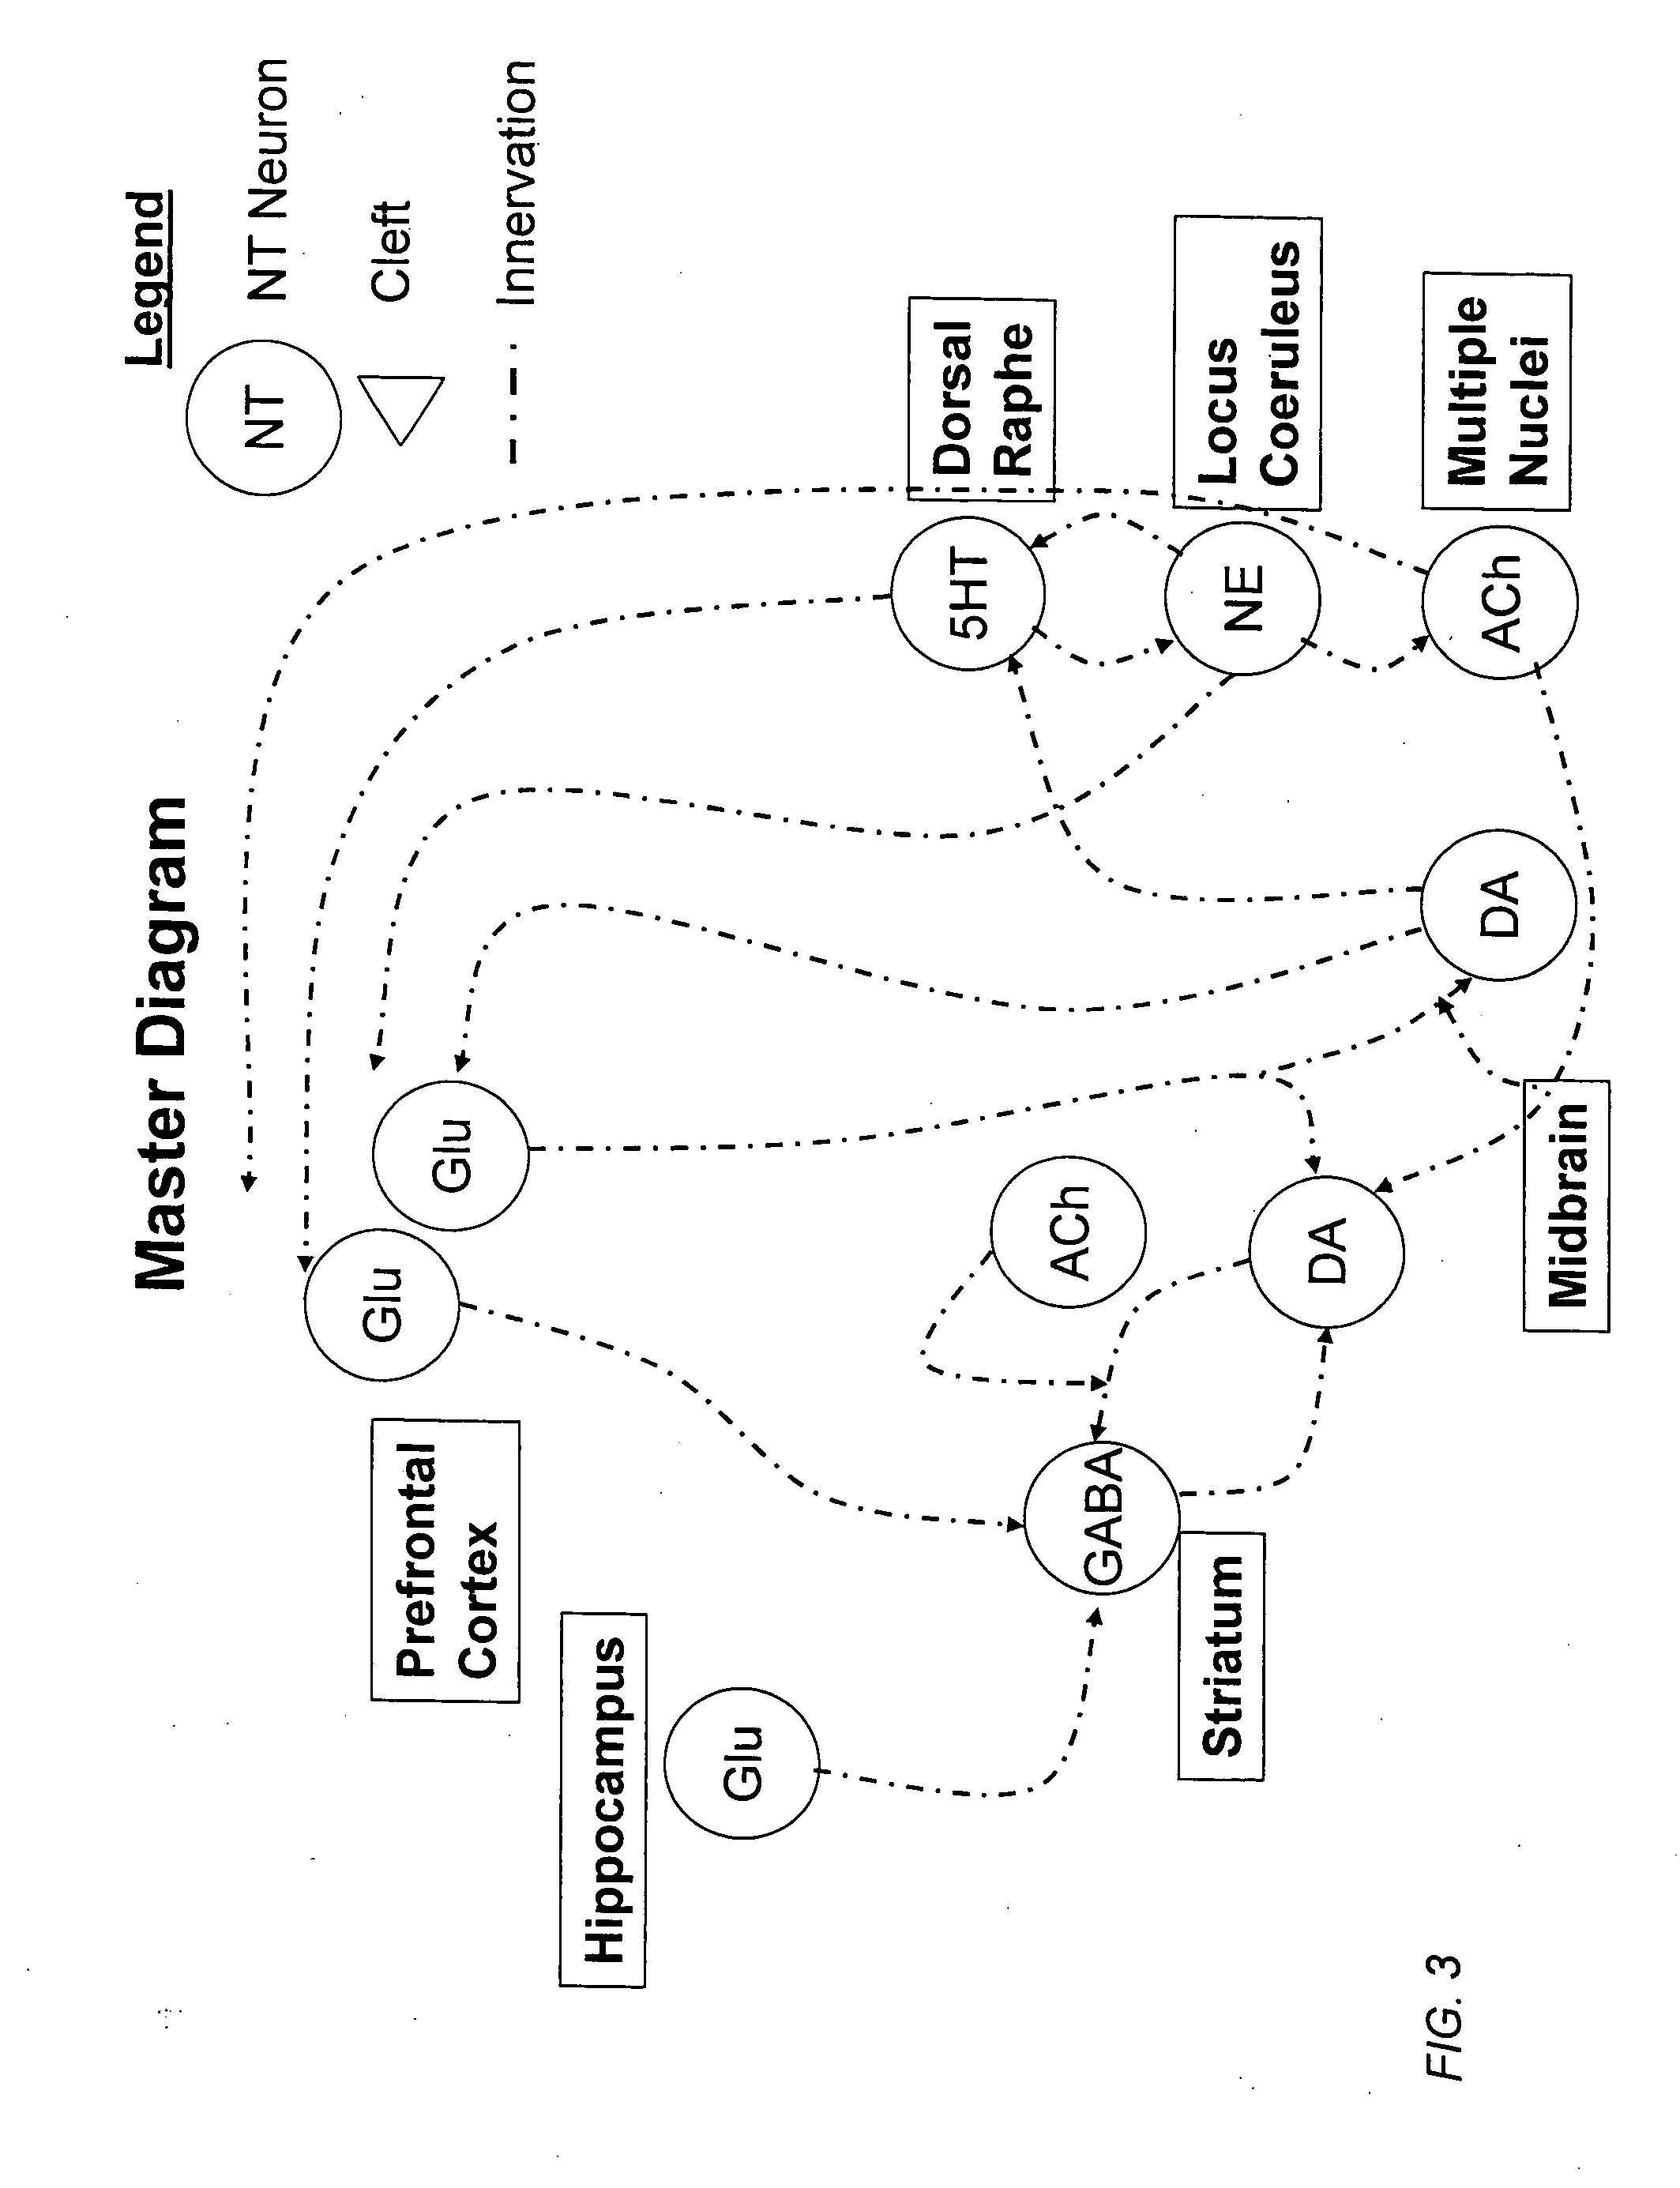 Method and apparatus for computer modeling of the interaction between and among cortical and subcortical areas in the human brain for the purpose of predicting the effect of drugs in psychiatric & cognitive diseases